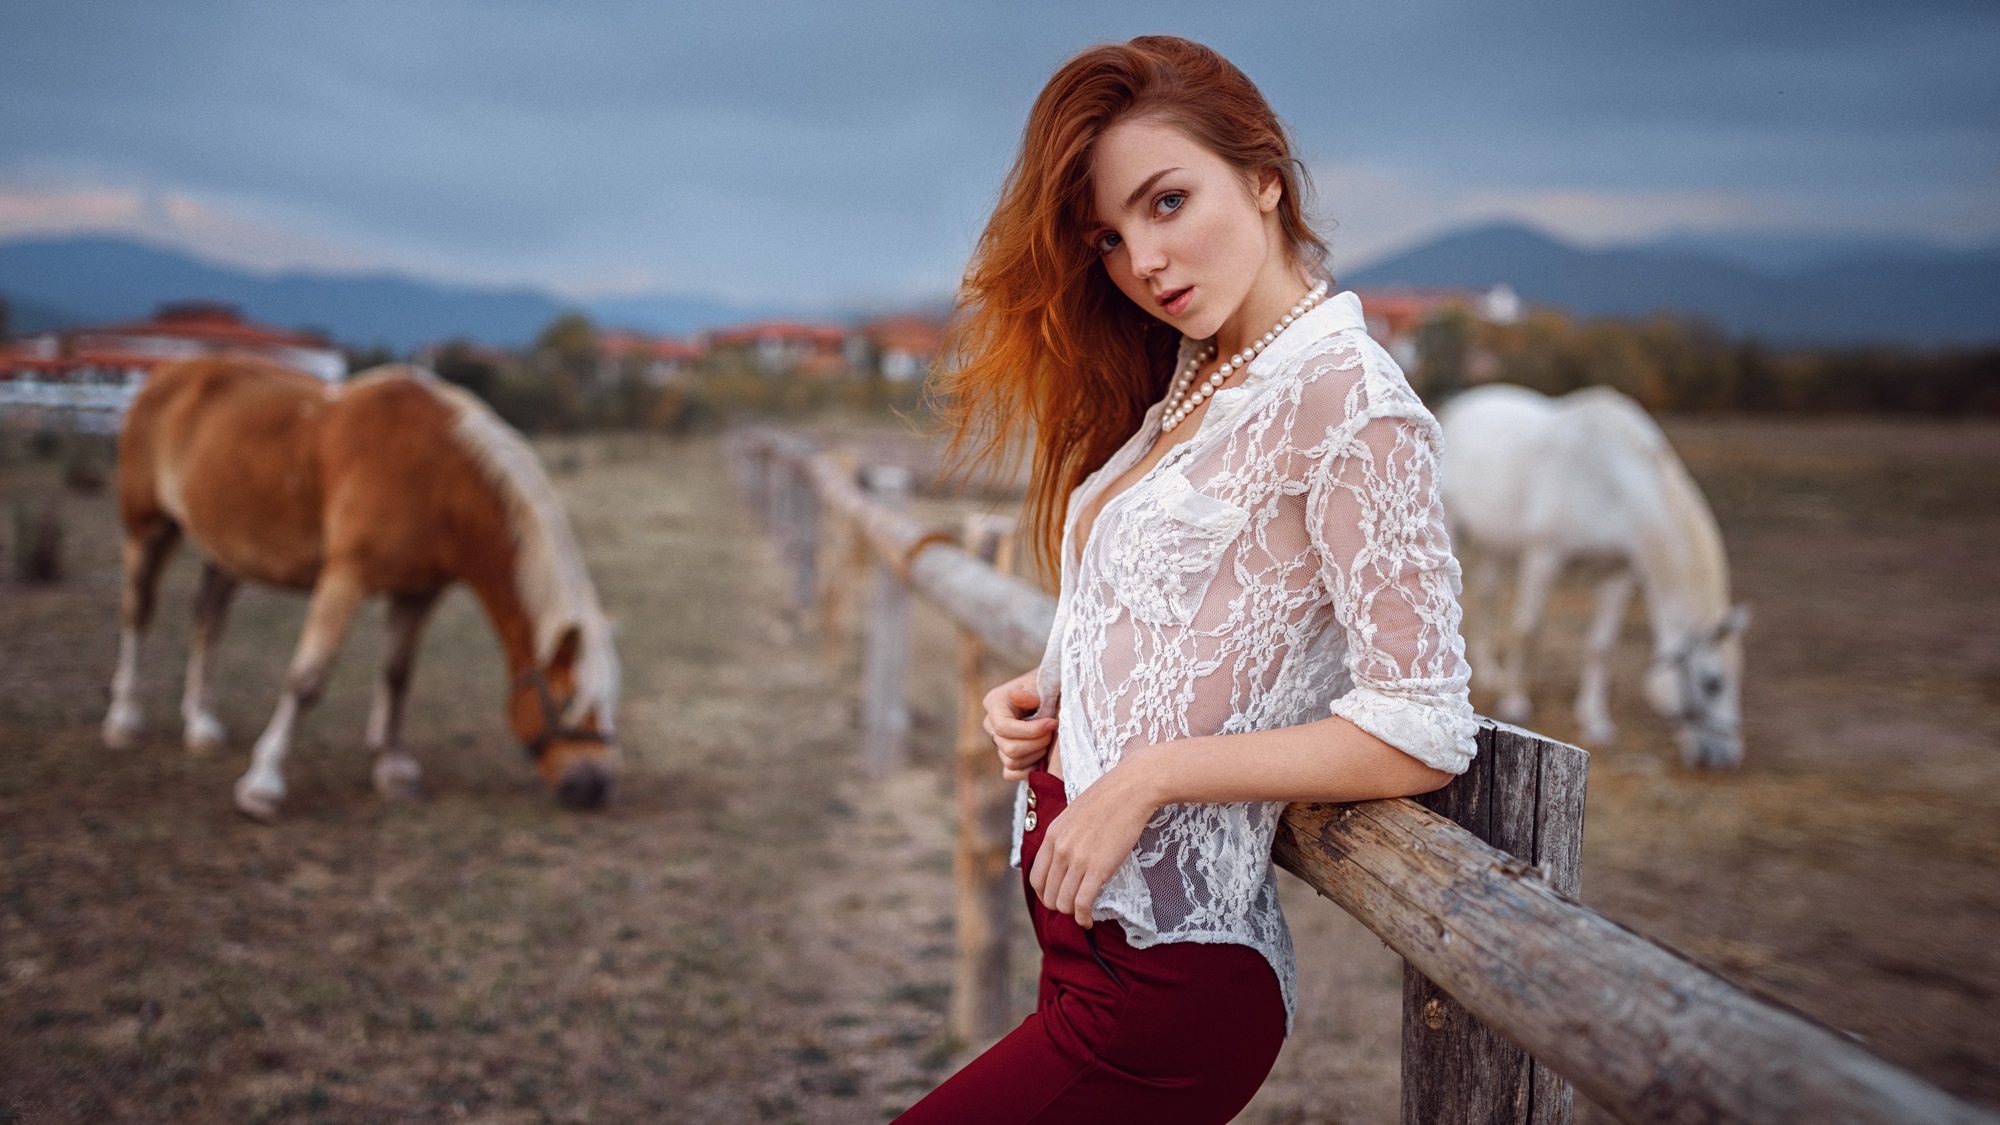 People 2000x1125 Ekaterina Sherzhukova women redhead model looking at viewer side view pearl necklace shirt see-through clothing no bra cleavage pants fence field horse depth of field outdoors women outdoors Georgy Chernyadyev sheer clothing